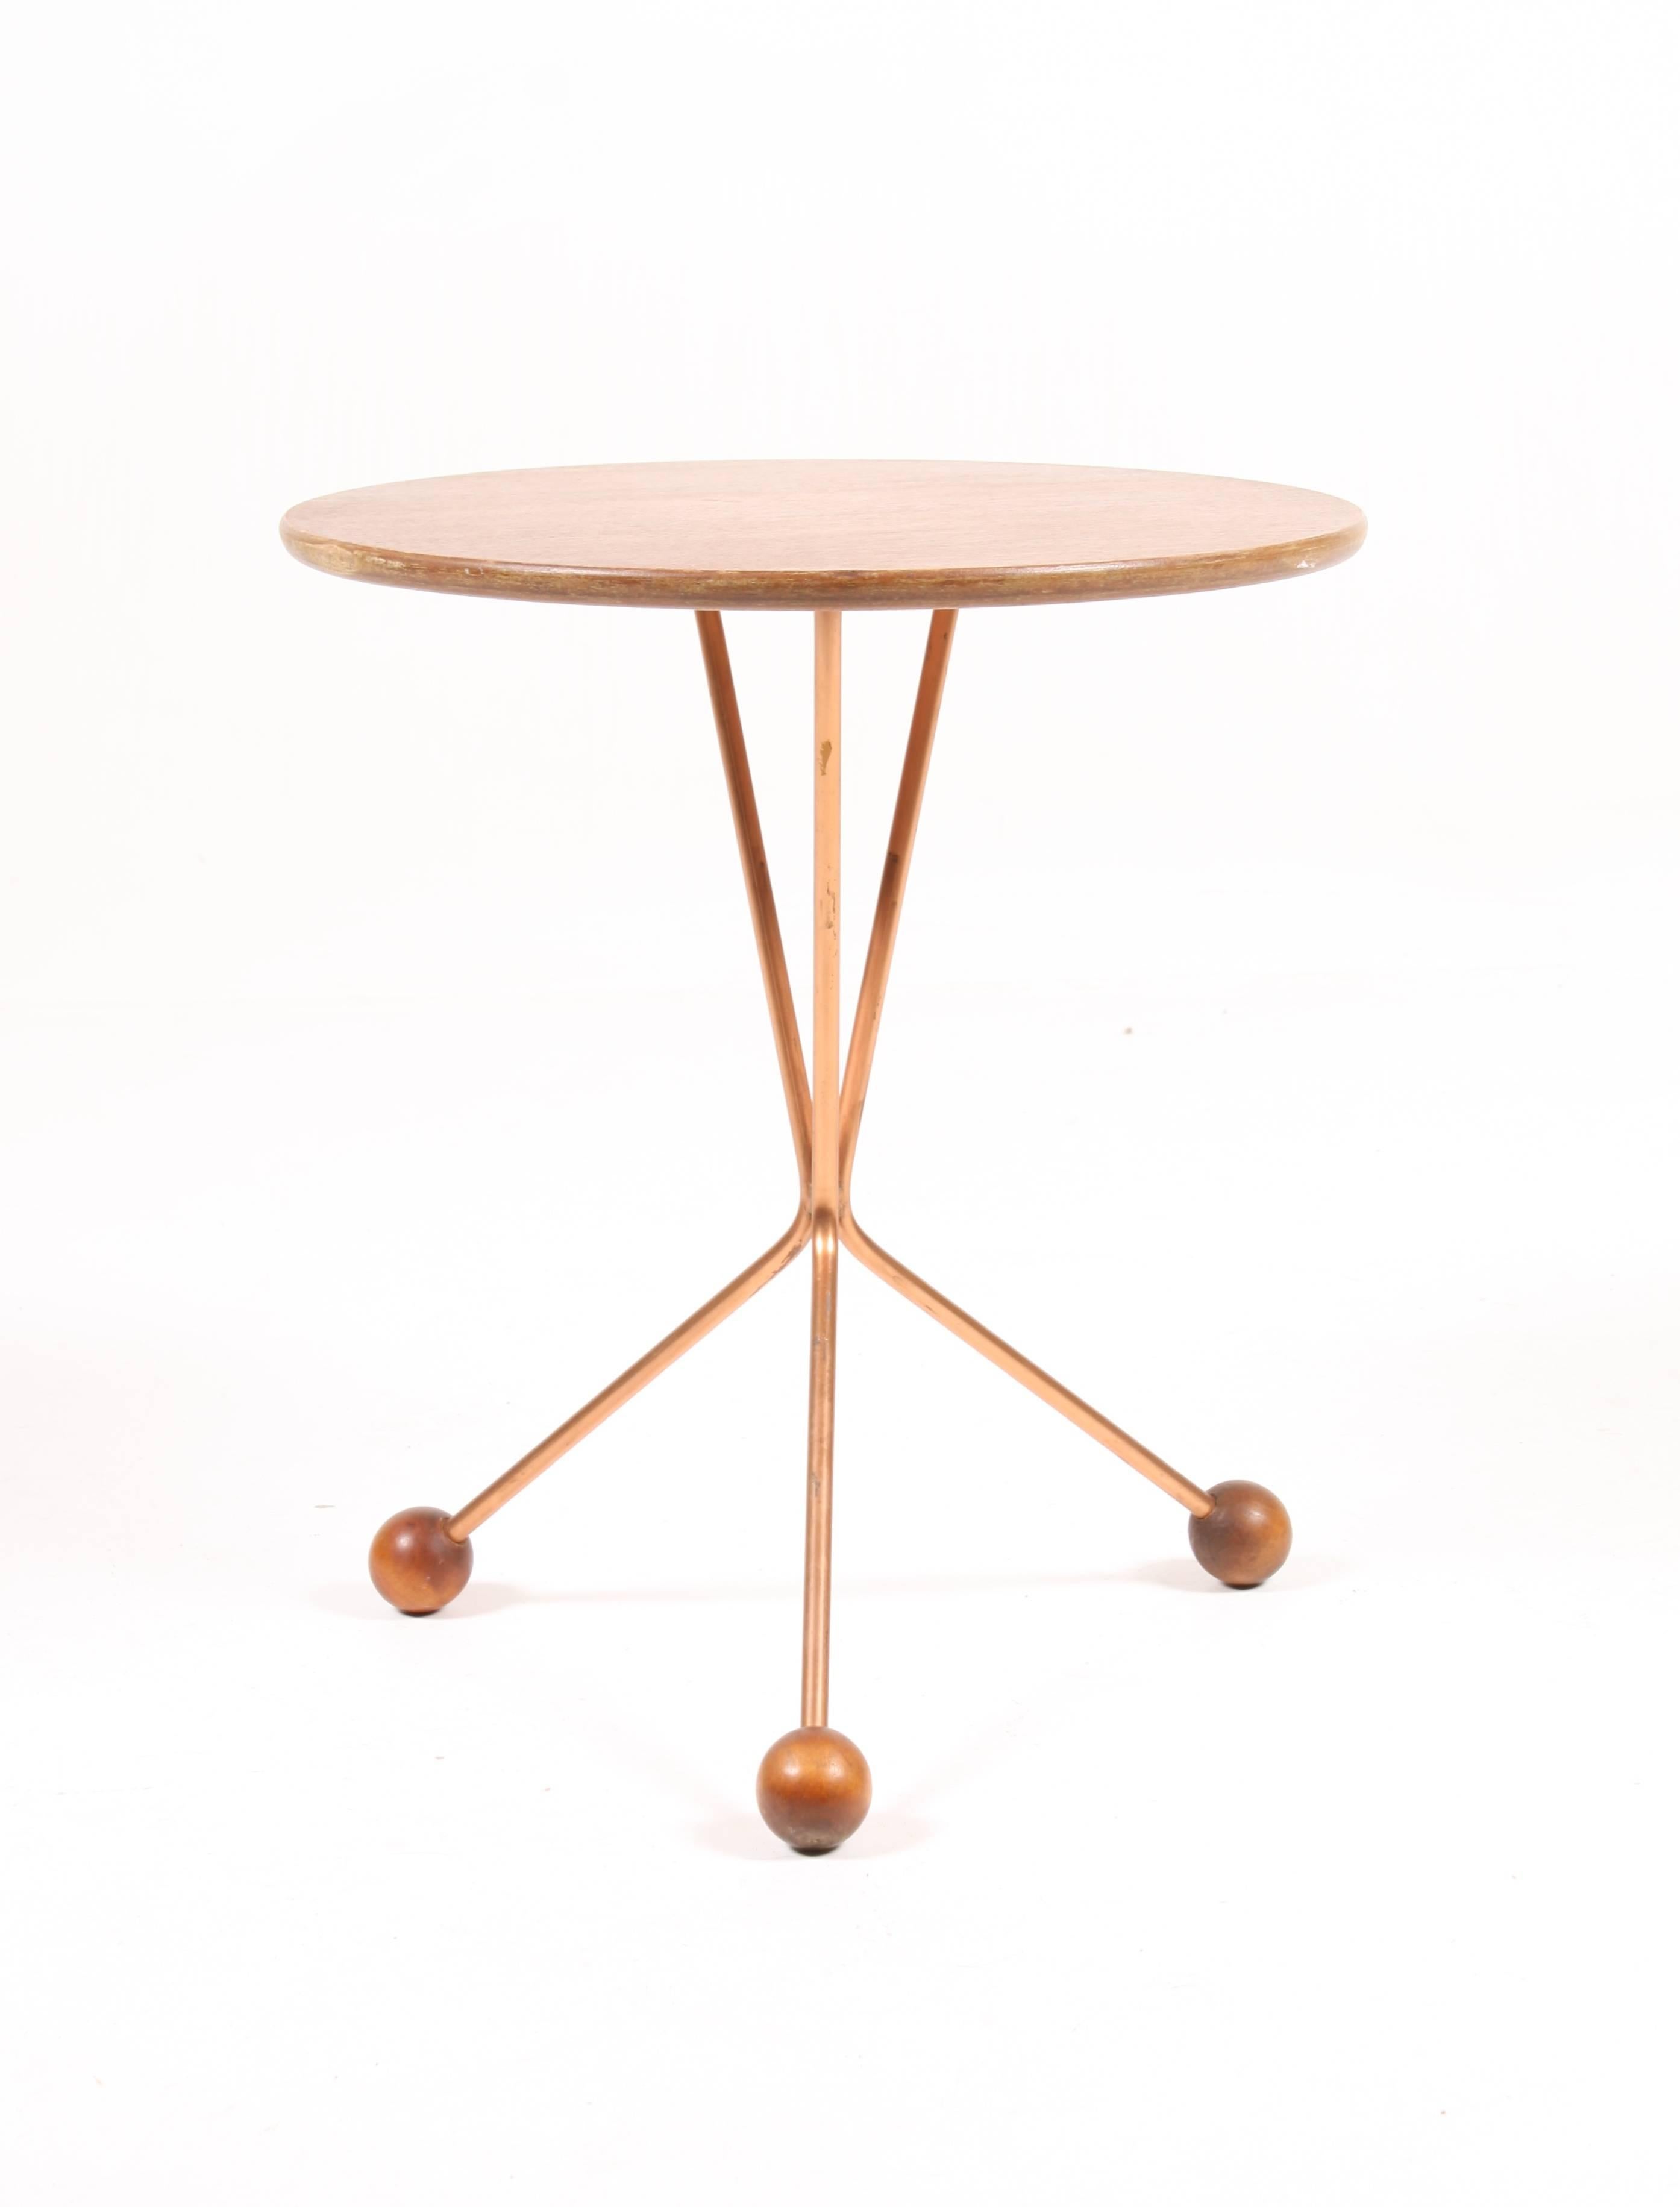 Side table in teak and brass designed by Albert Larsson for Alberts Tibro. Made in Sweden in the 1960s. Great original condition.